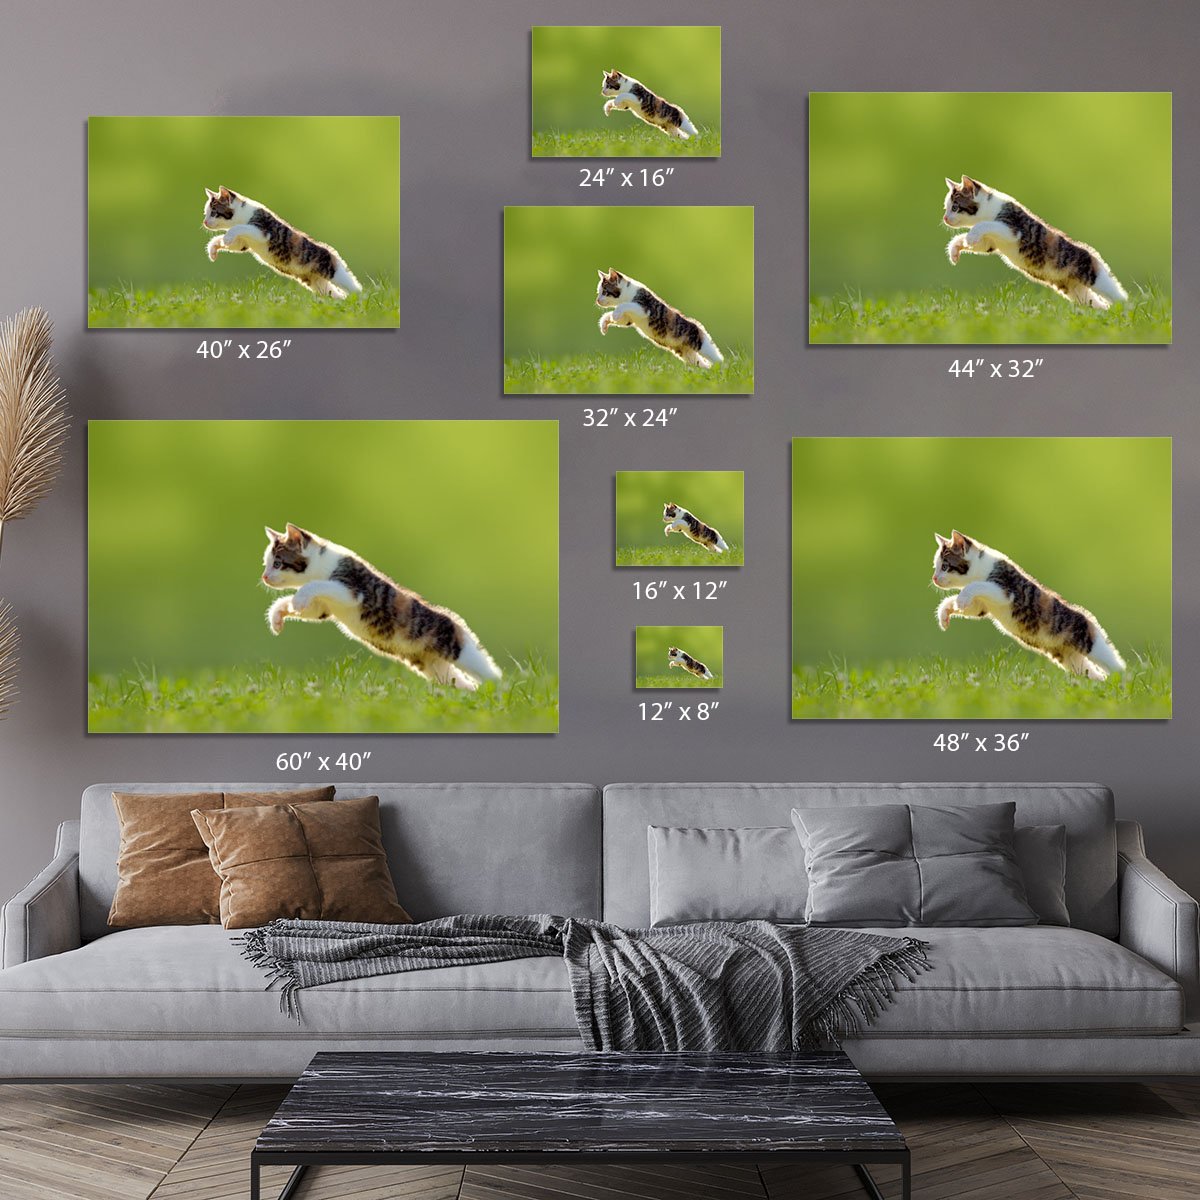 young cat jumps over a meadow in the backlit Canvas Print or Poster